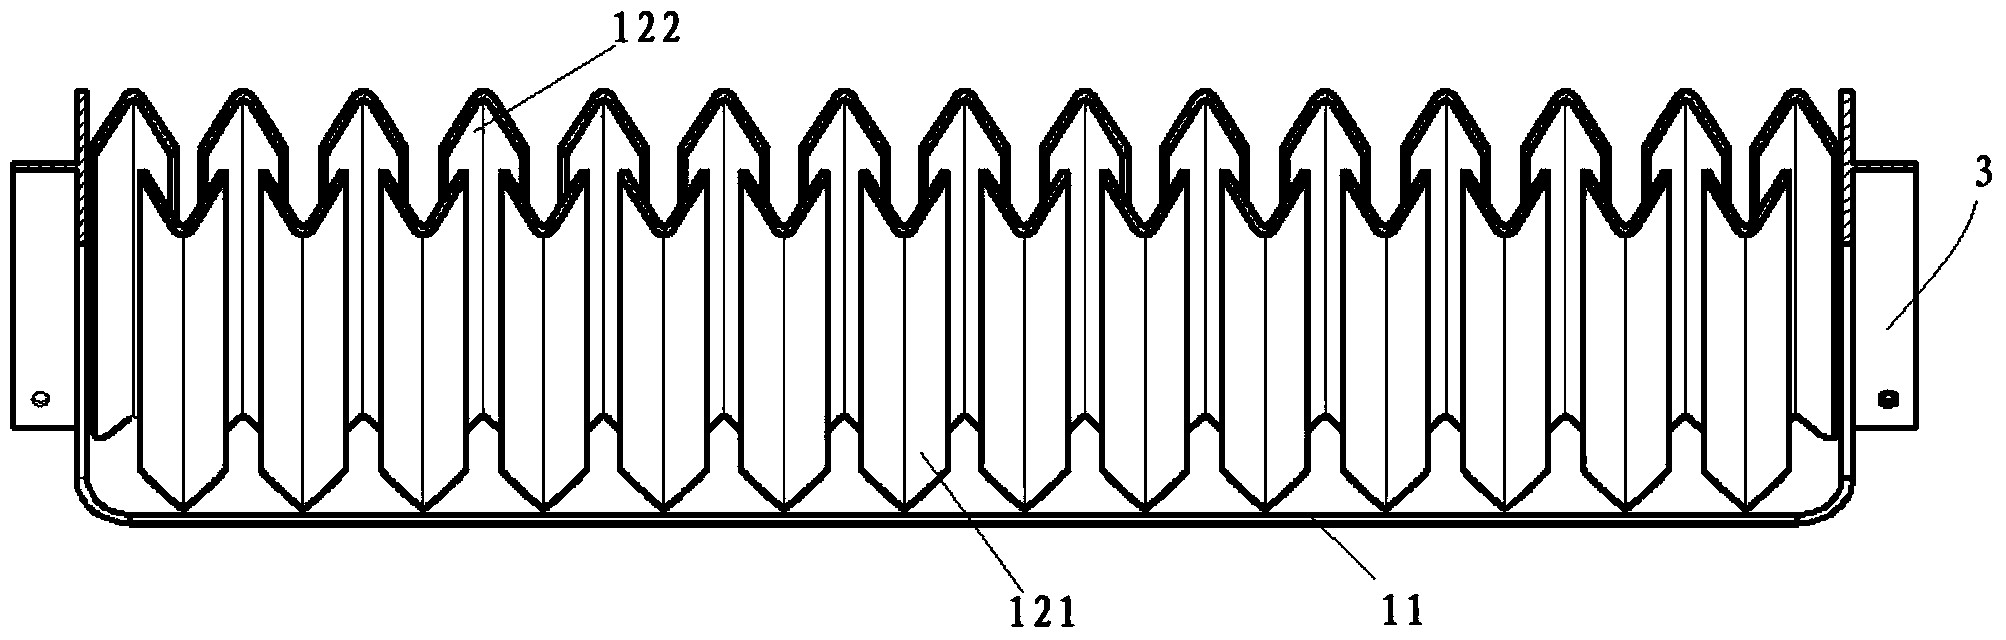 Aluminum alloy grating and welding process thereof